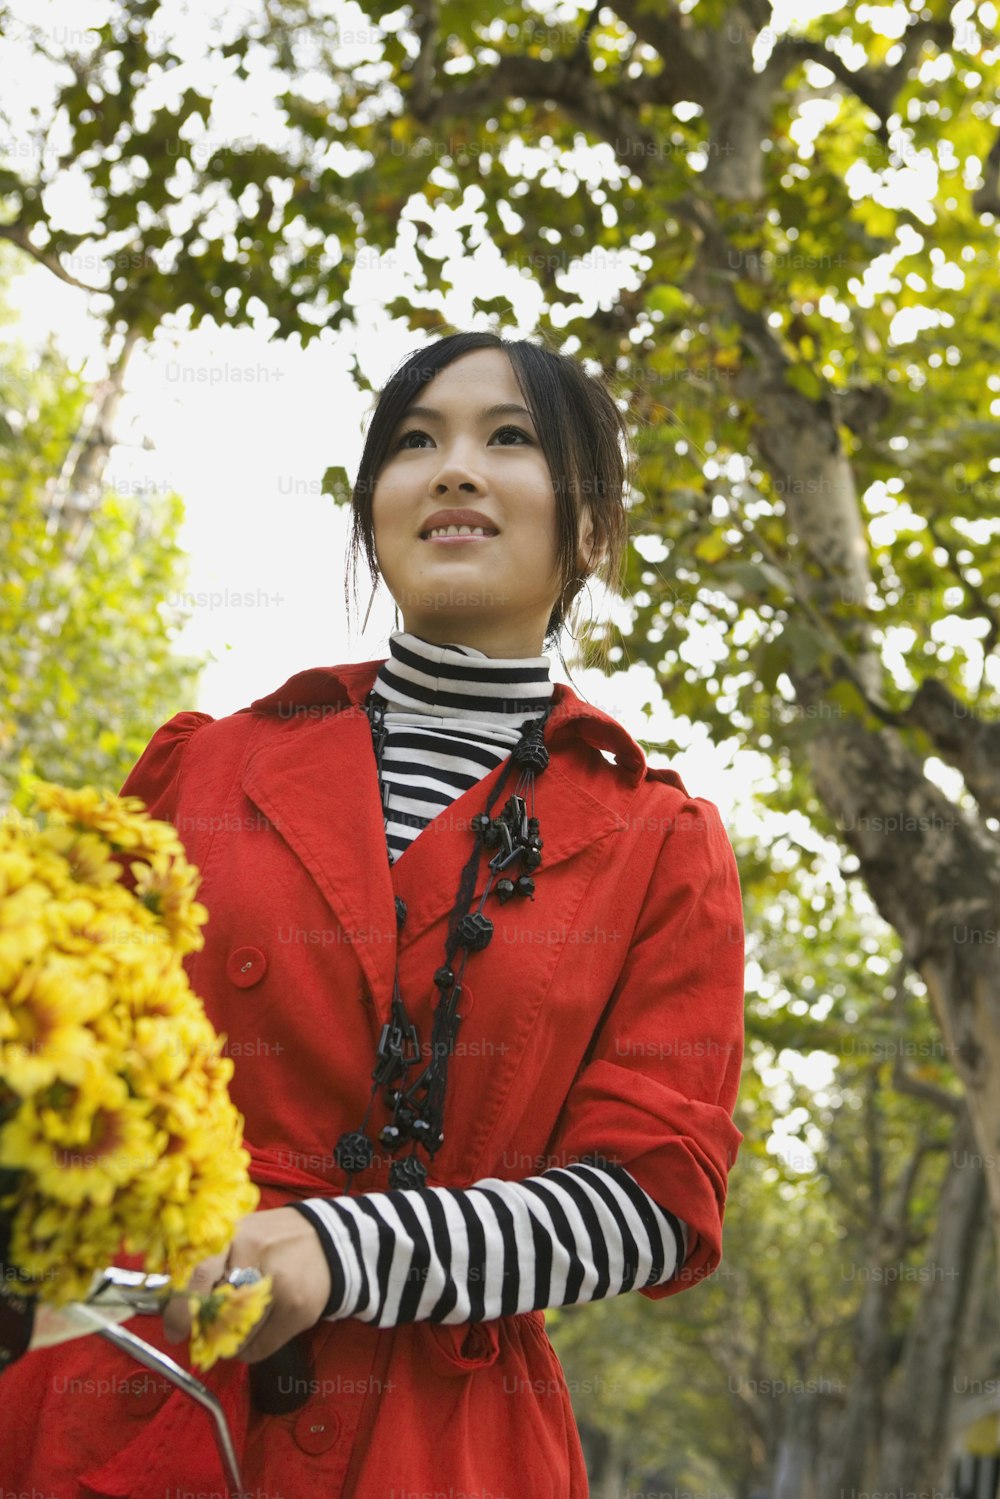 a woman in a red coat holding a basket of flowers